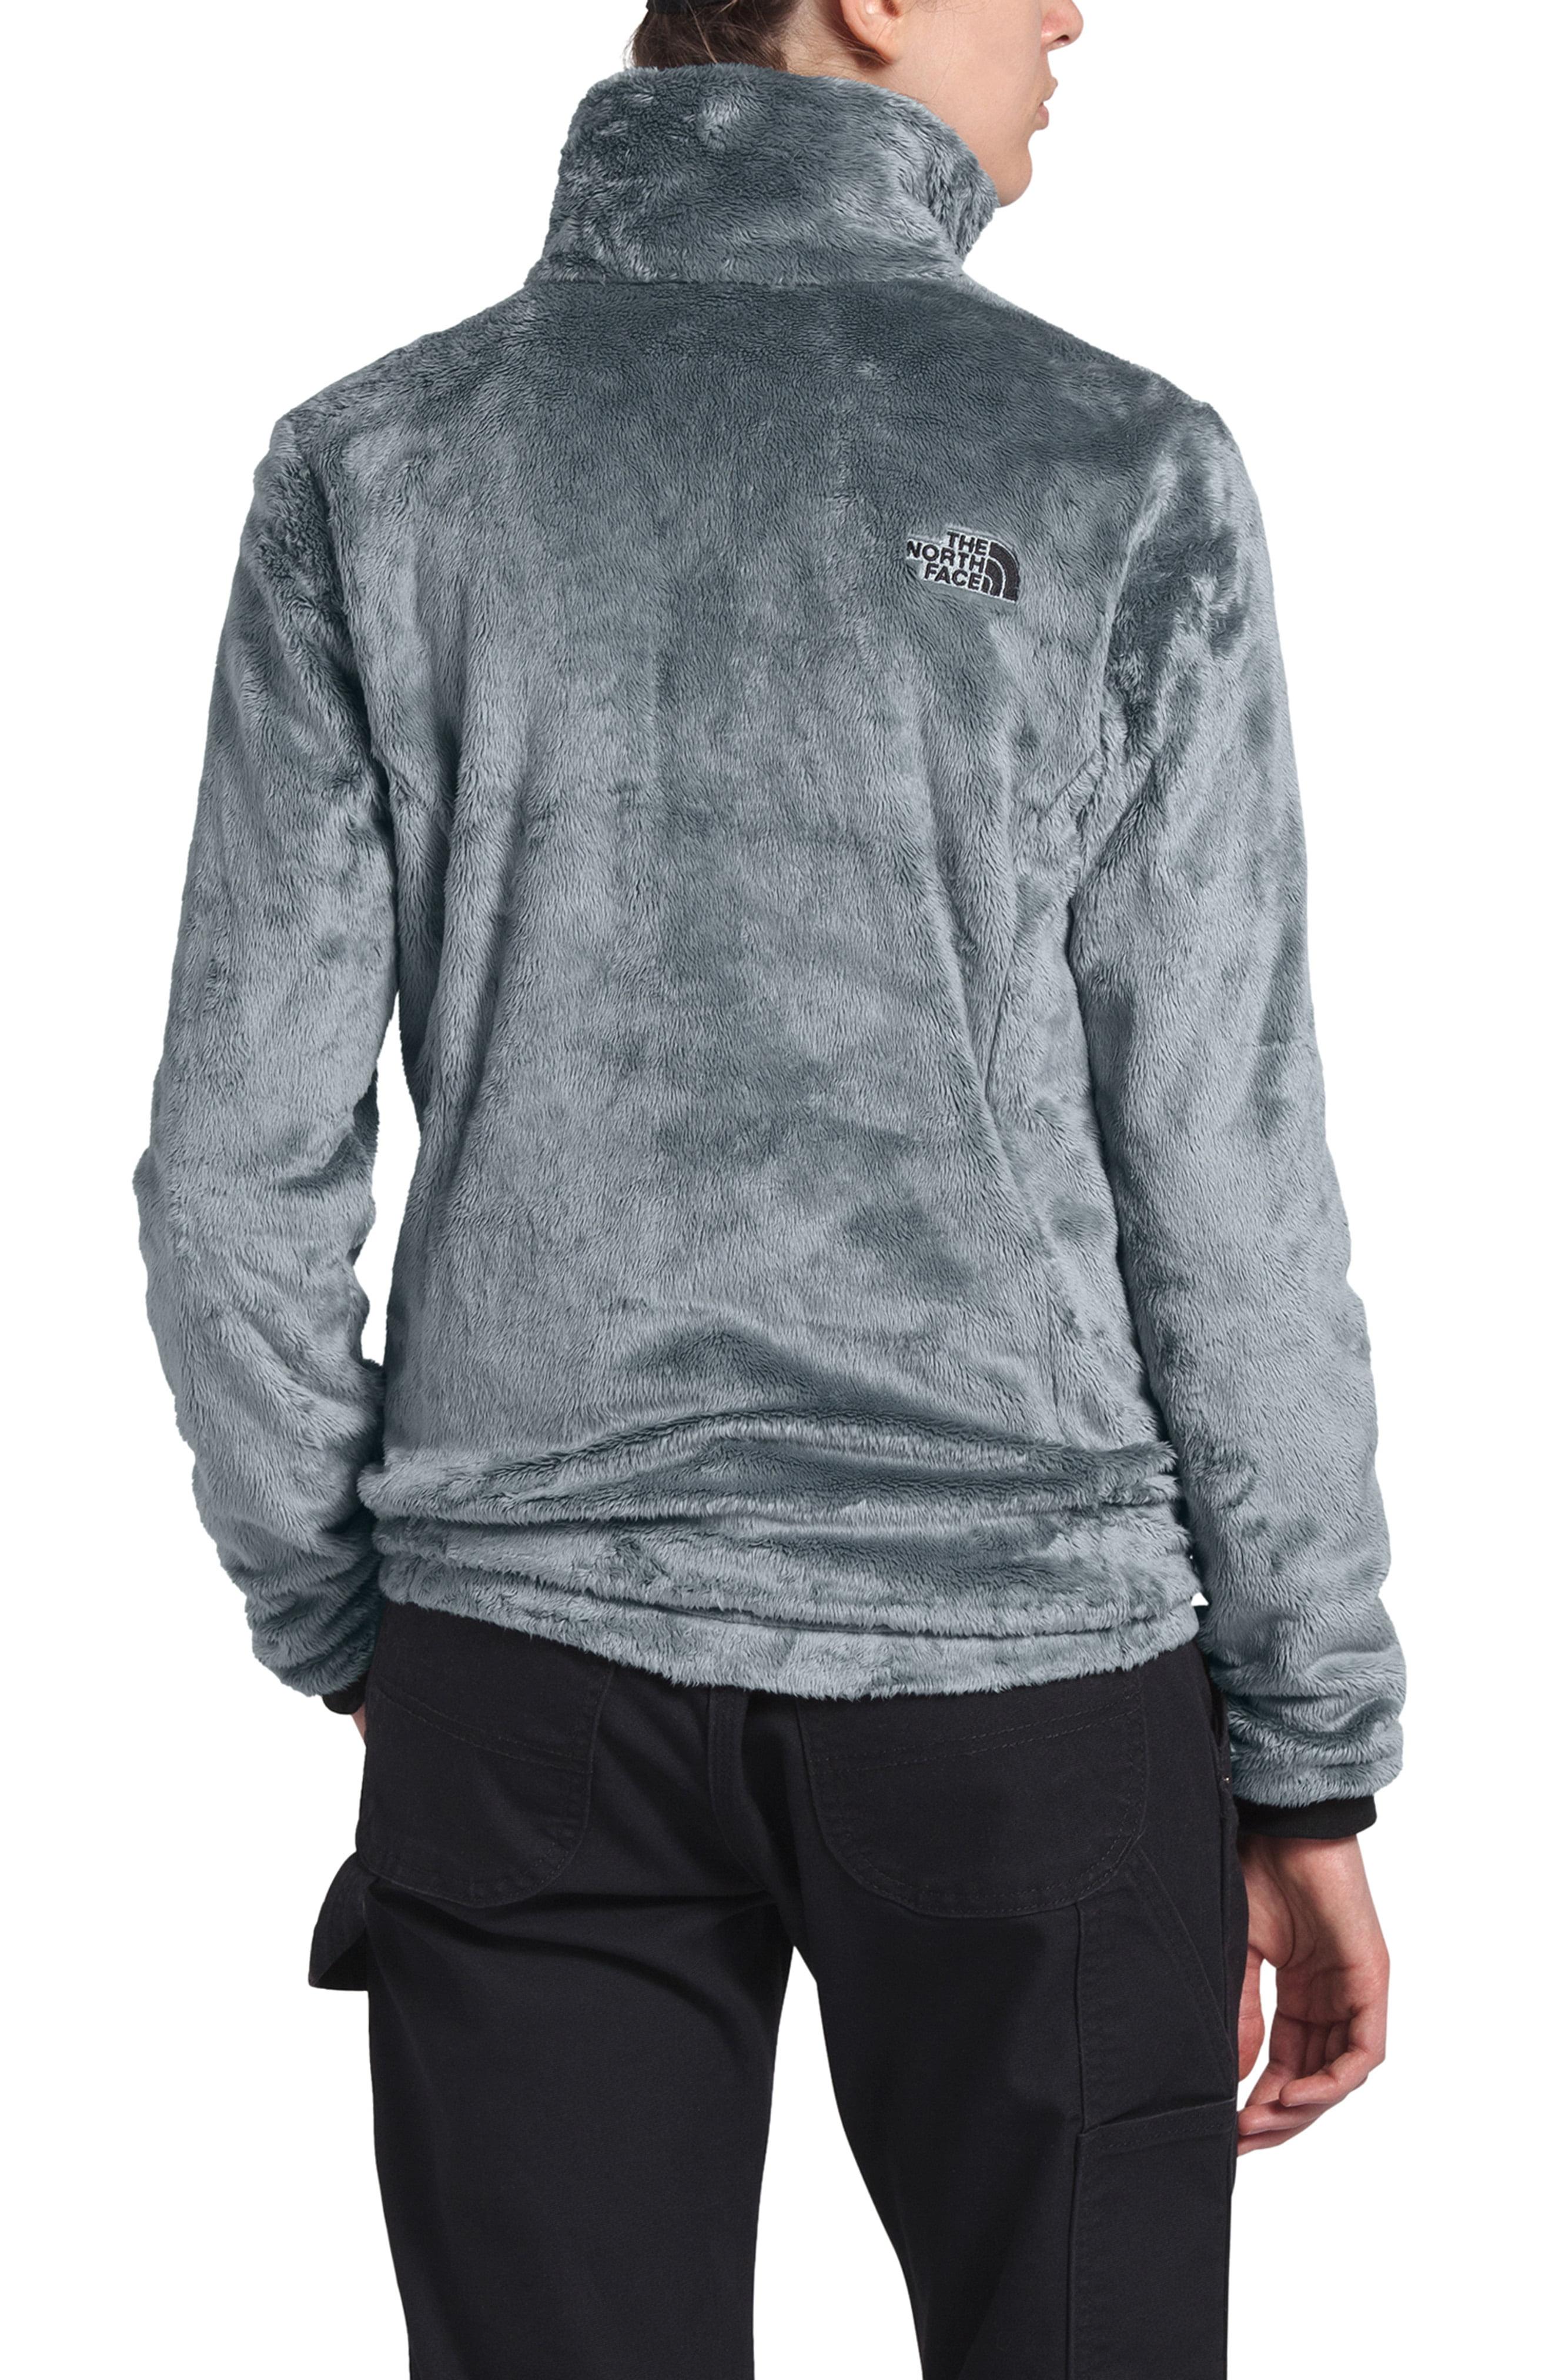 The North Face Osito Fleece Jacket in Gray